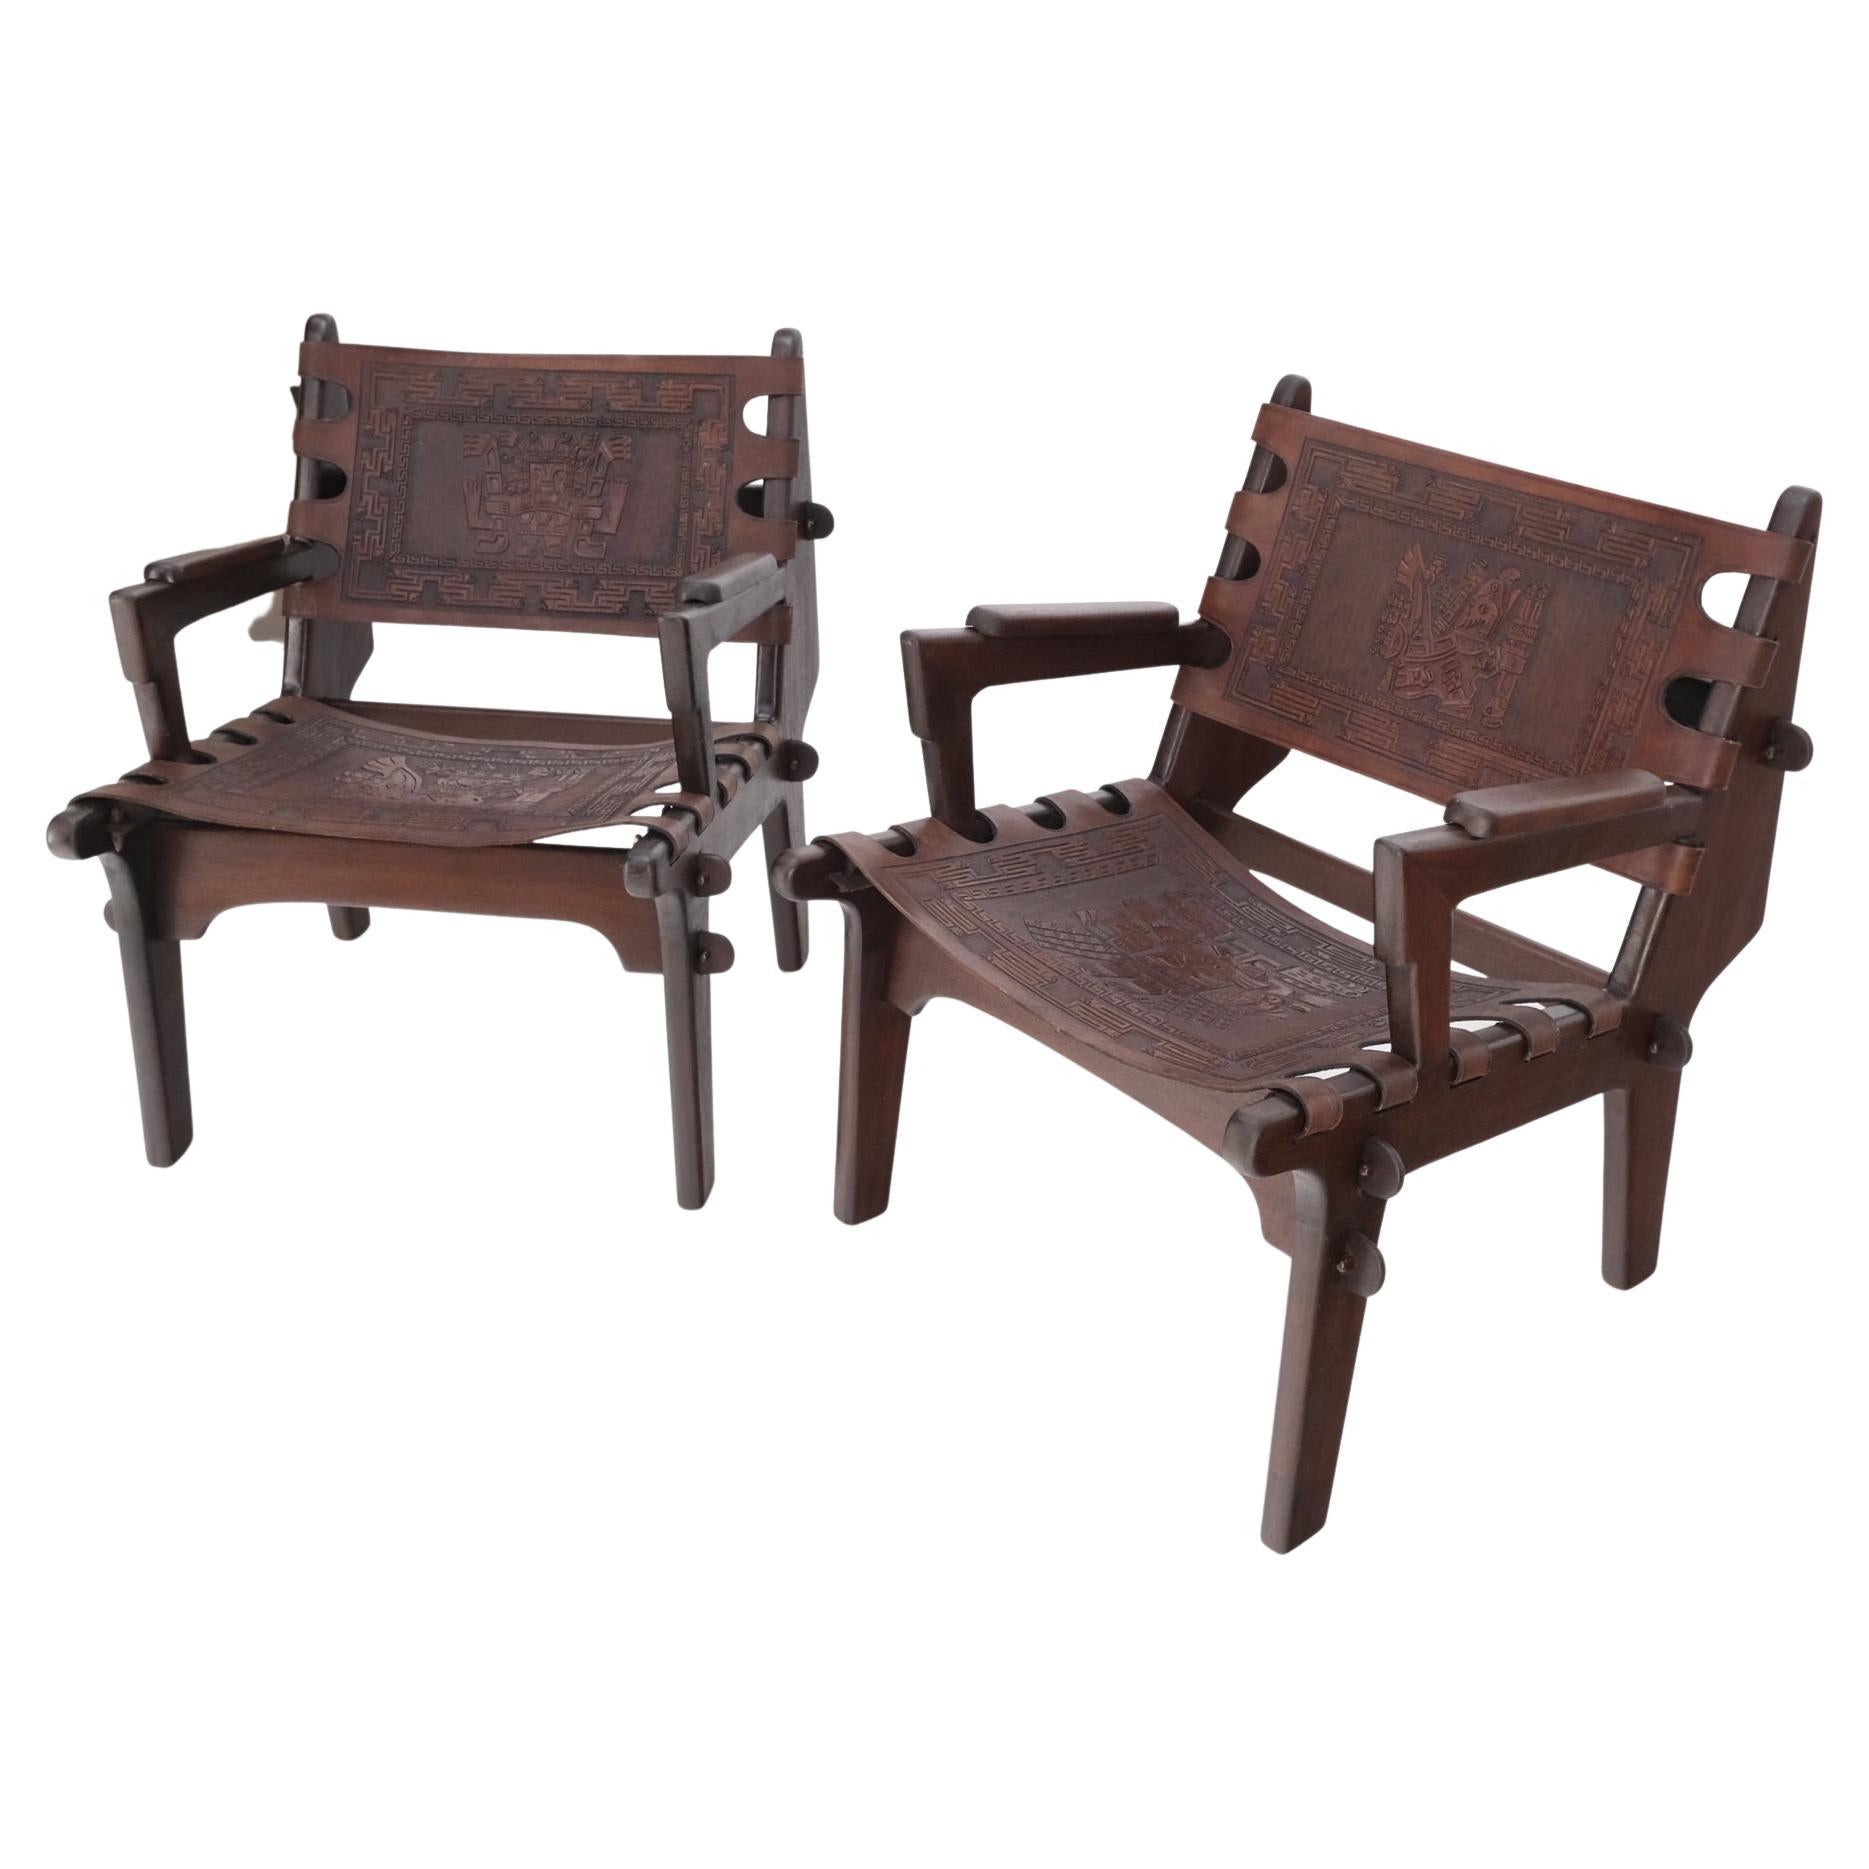 Pair of walnut carved tolled leather sling seats arm chairs by Angel Pazmino.